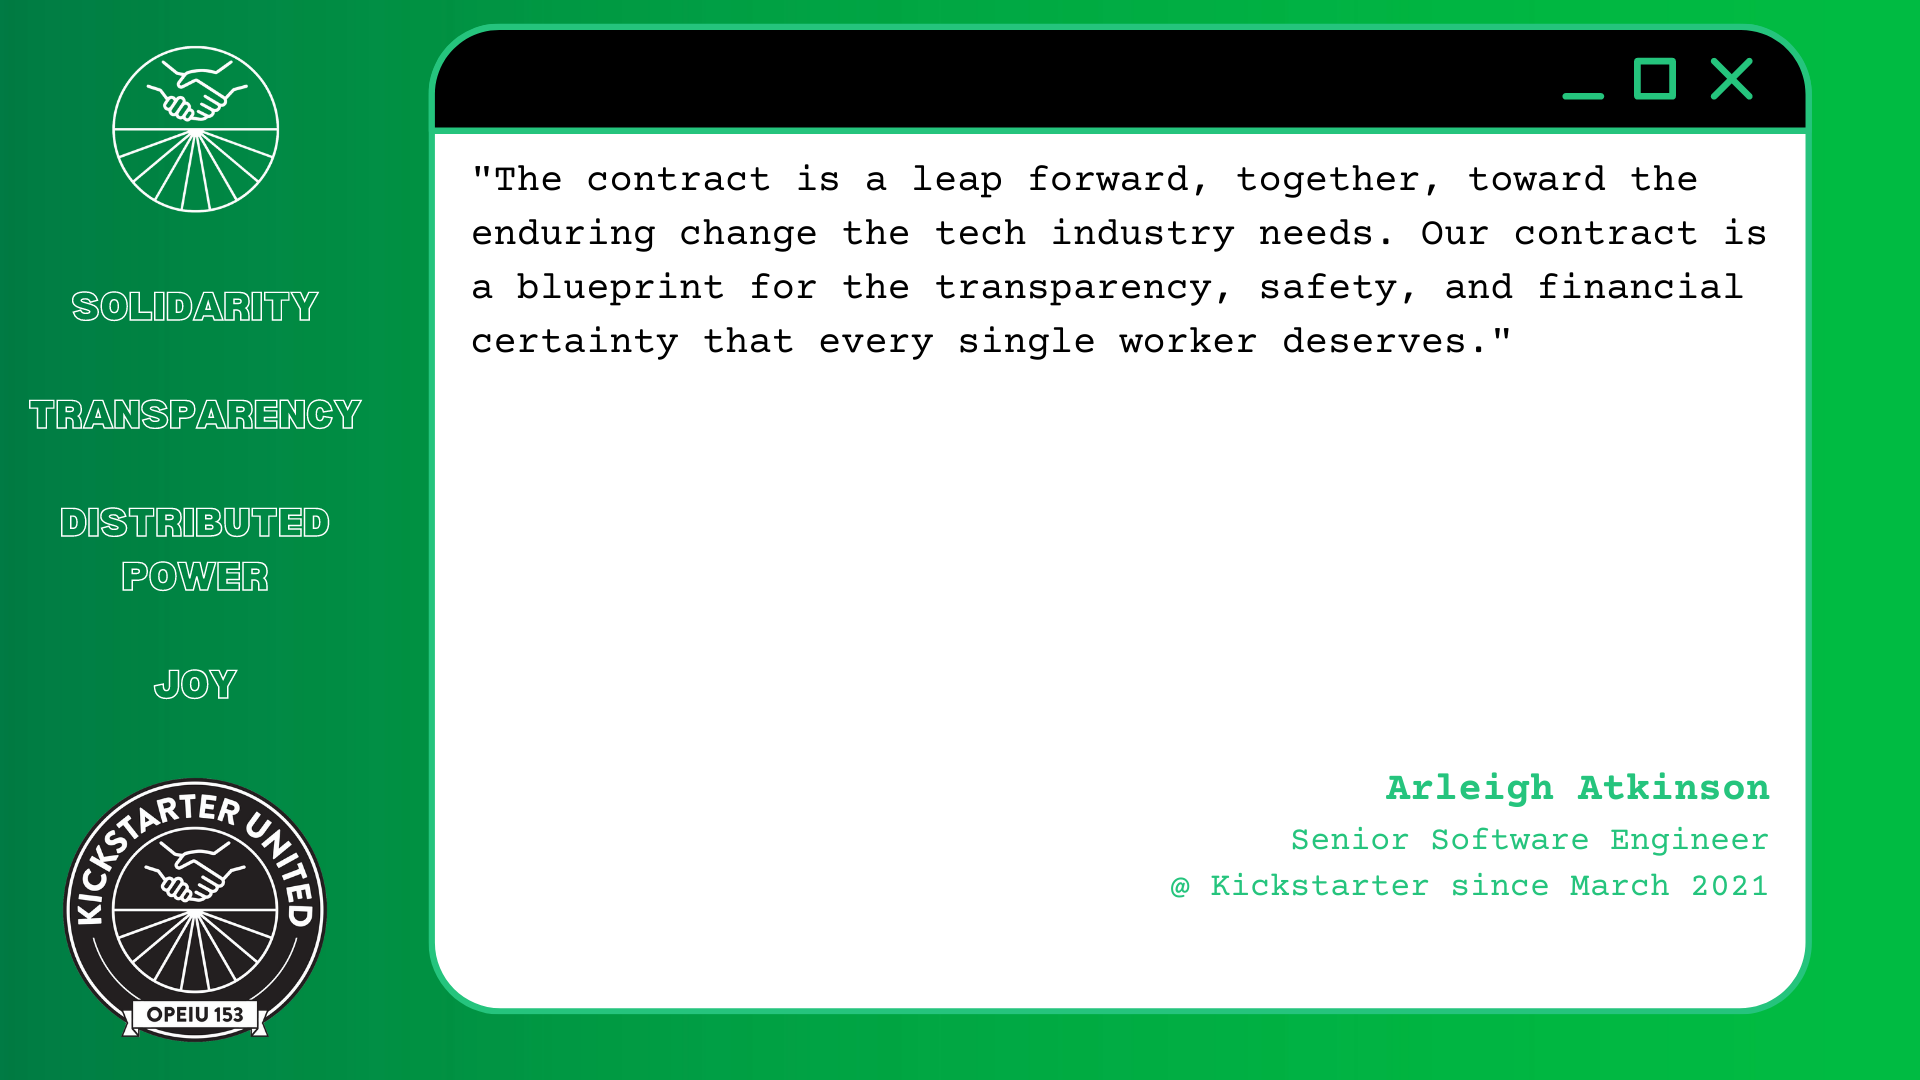 "The contract is a leap forward, together, toward the enduring change the tech industry needs. Our contract is a blueprint for the transparency, safety, and financial certainty that every single worker deserves." Arleigh Atkinson, Senior Software Engineer @ Kickstarter since March 2021